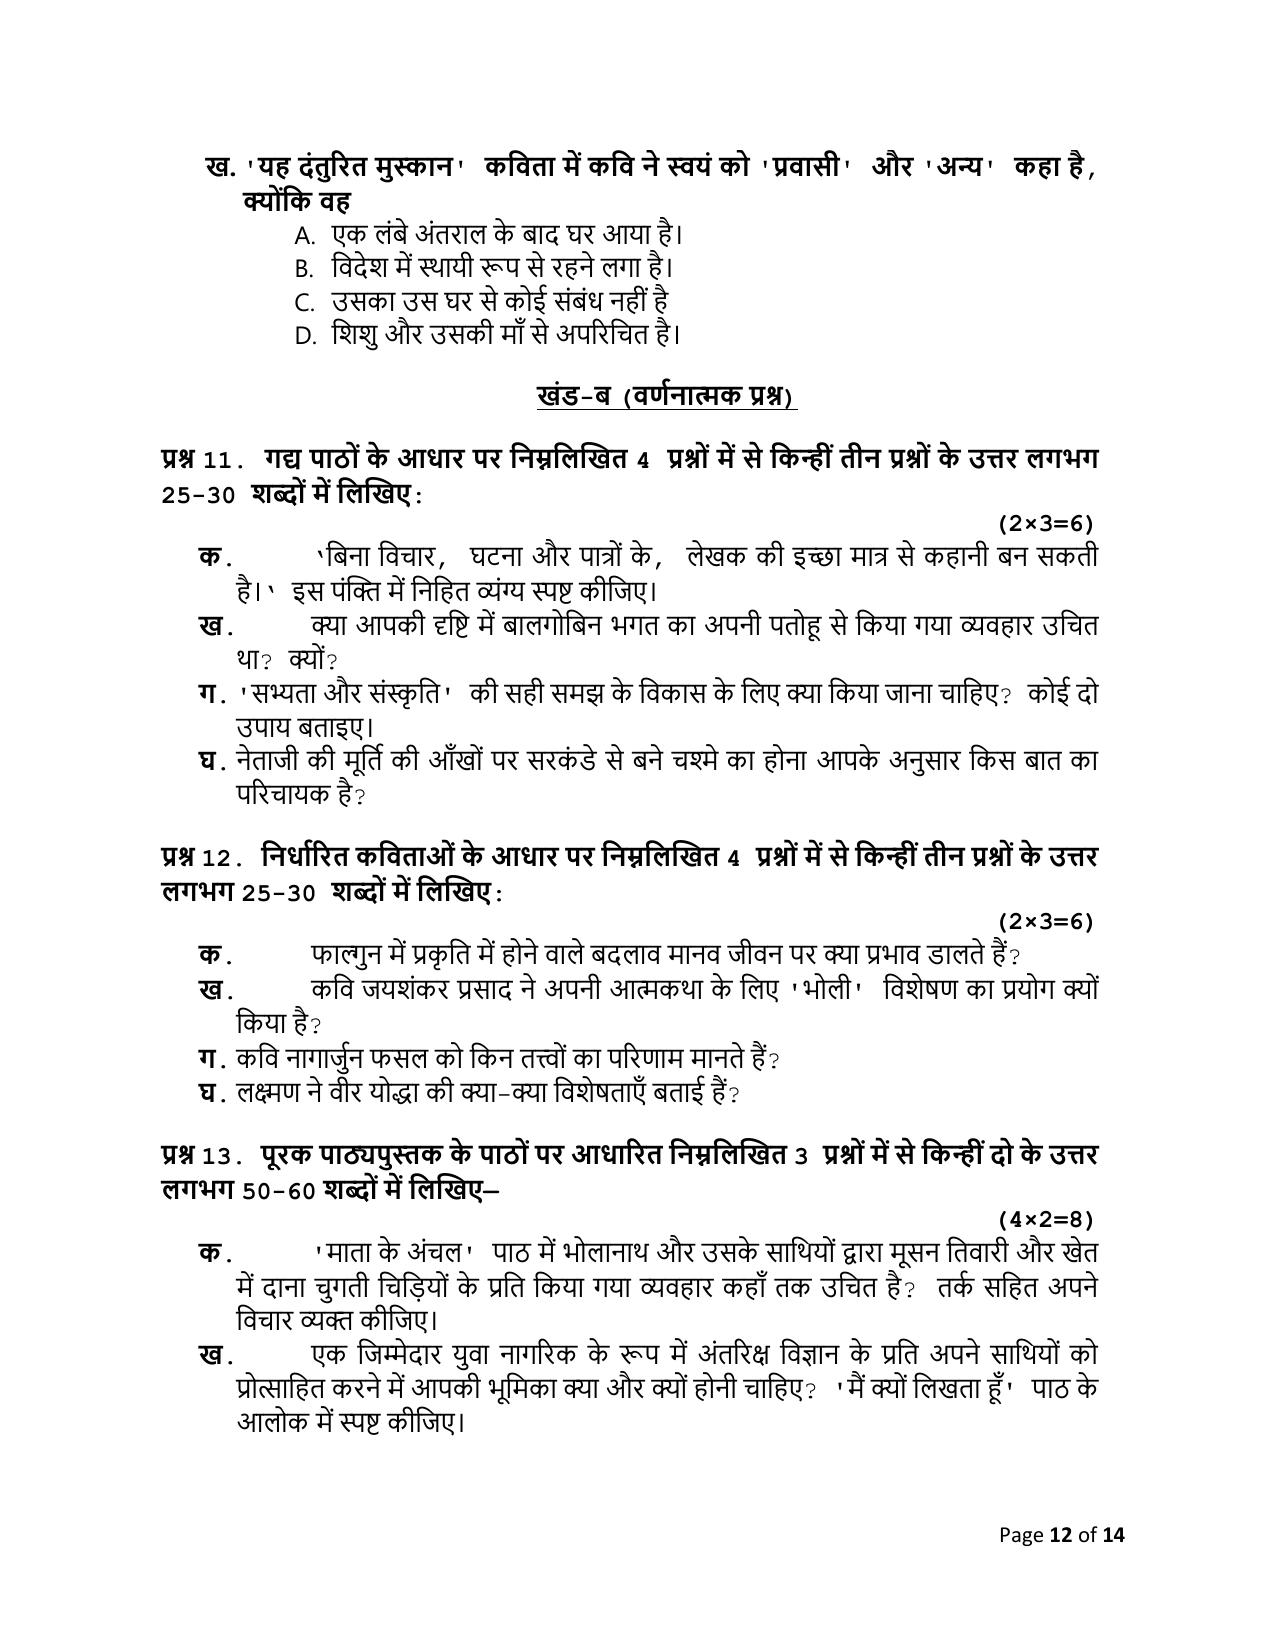 CBSE Class 10 Hindi A Set 2 Practice Questions 2023-24 - Page 12